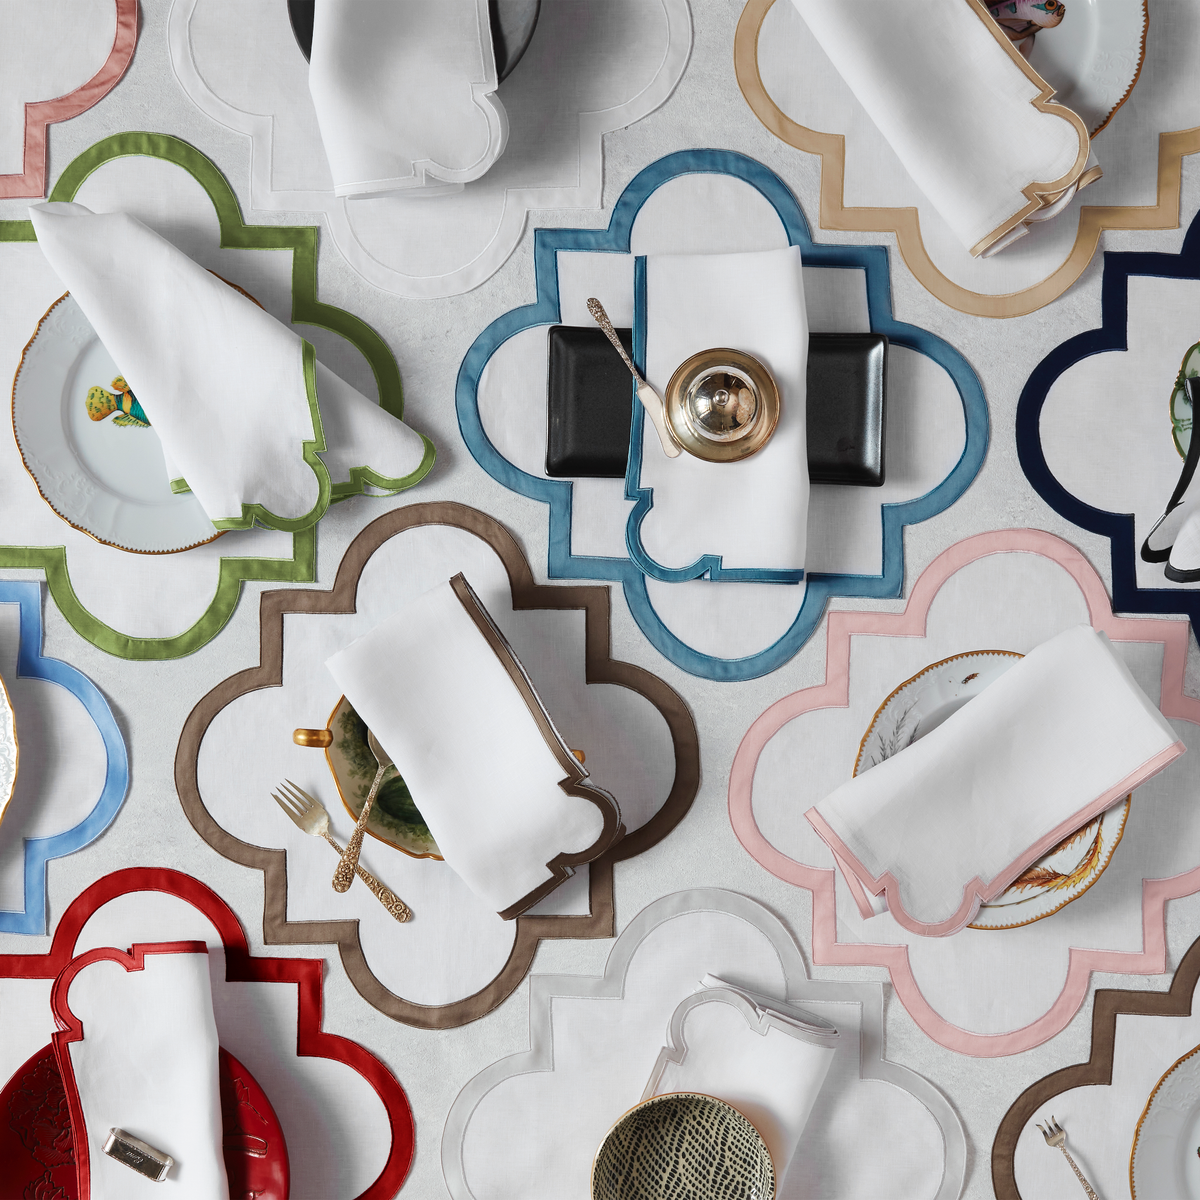 An Assortment of Matouk Mirasol Table Linens in Different Colors